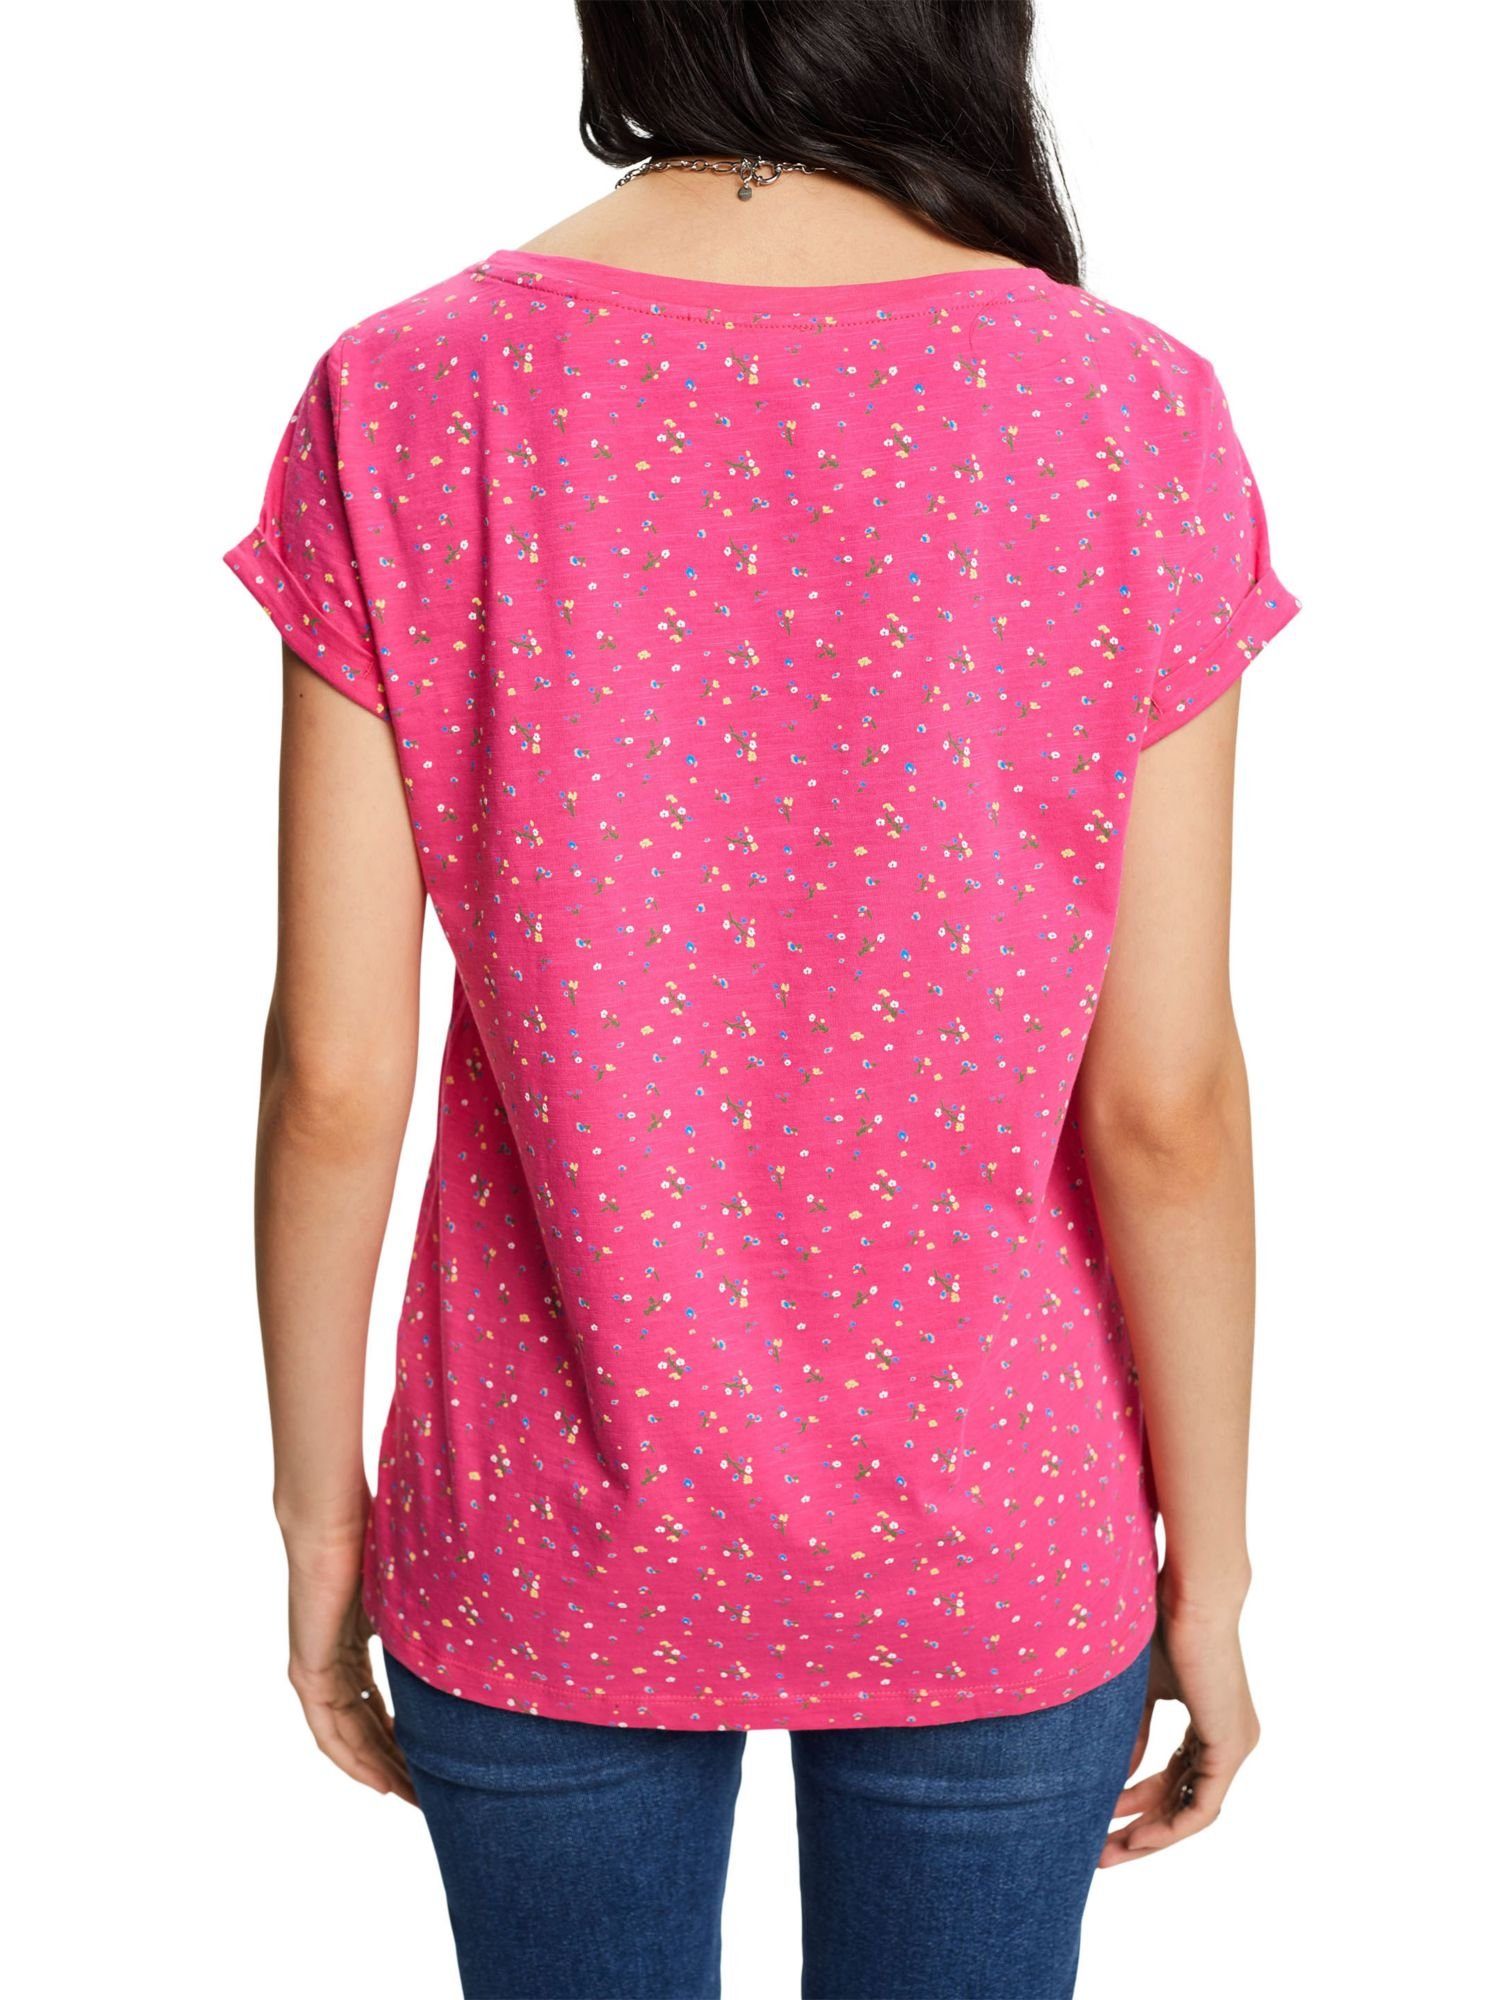 PINK T-Shirt T-Shirt Esprit by Allover-Muster mit edc (1-tlg) FUCHSIA